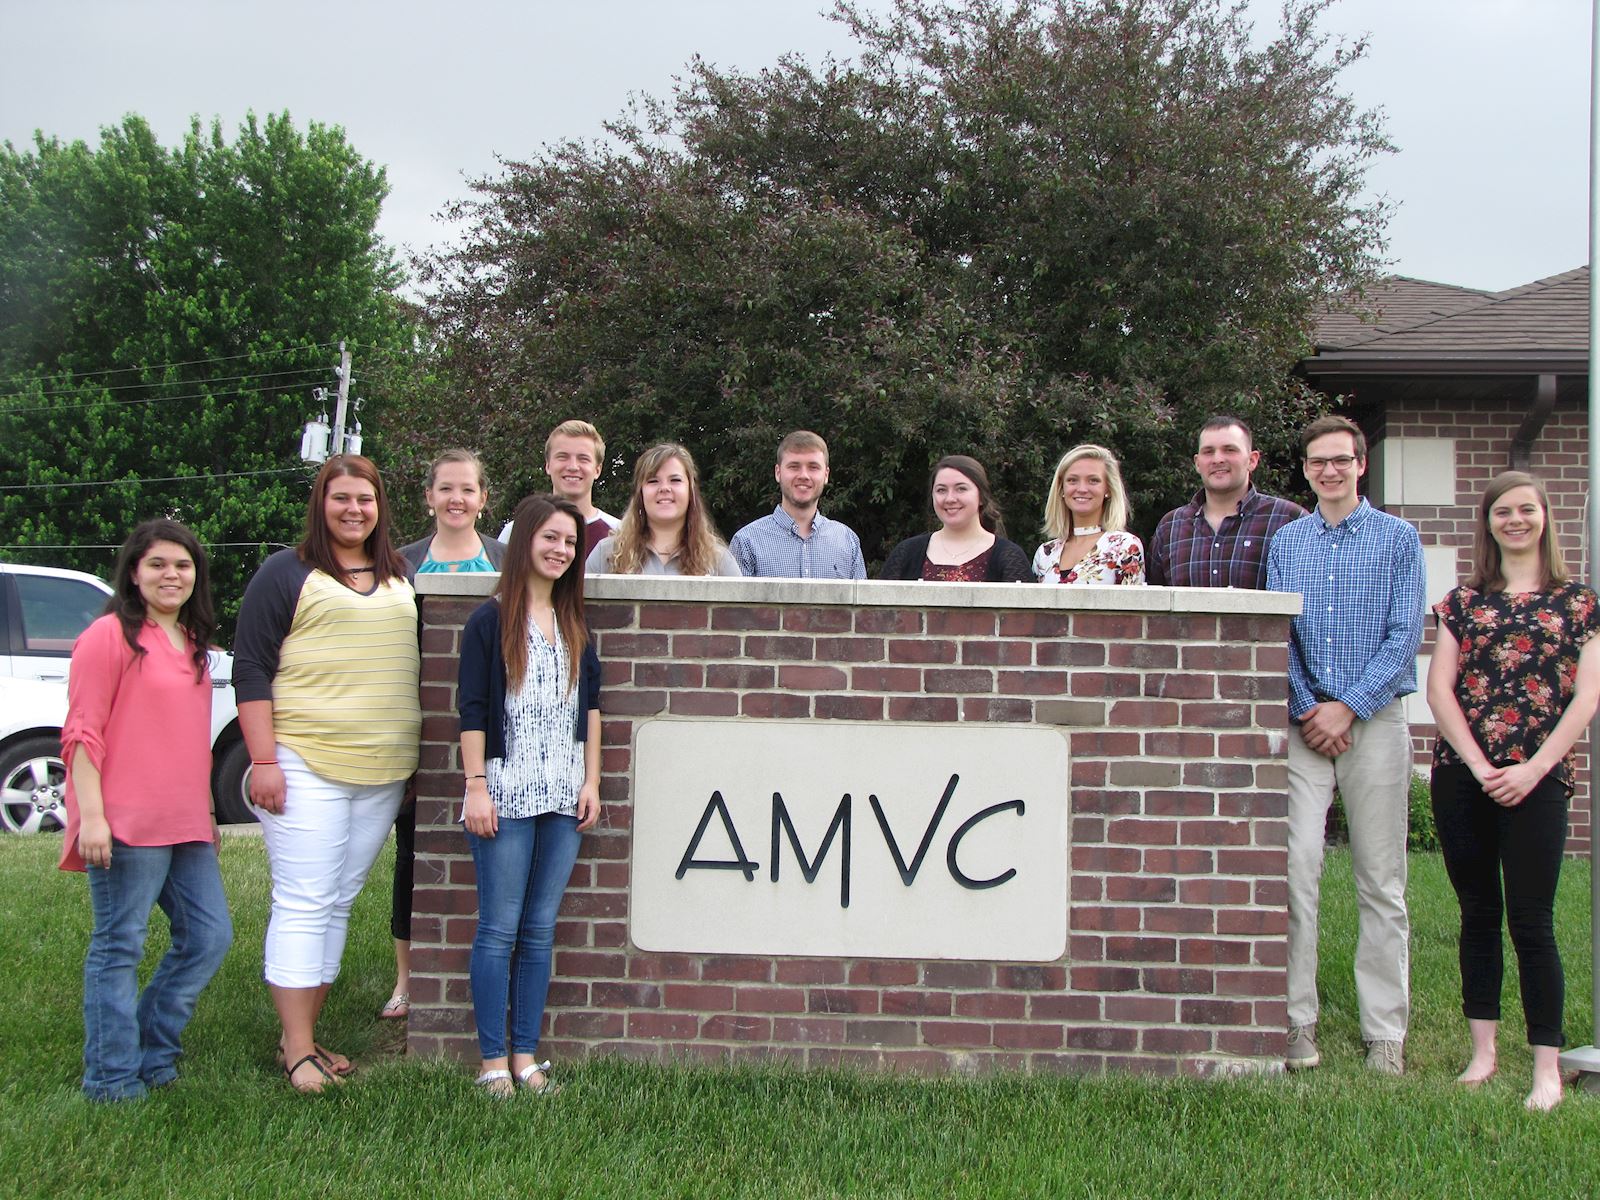 Students intern with AMVC to learn about pigs